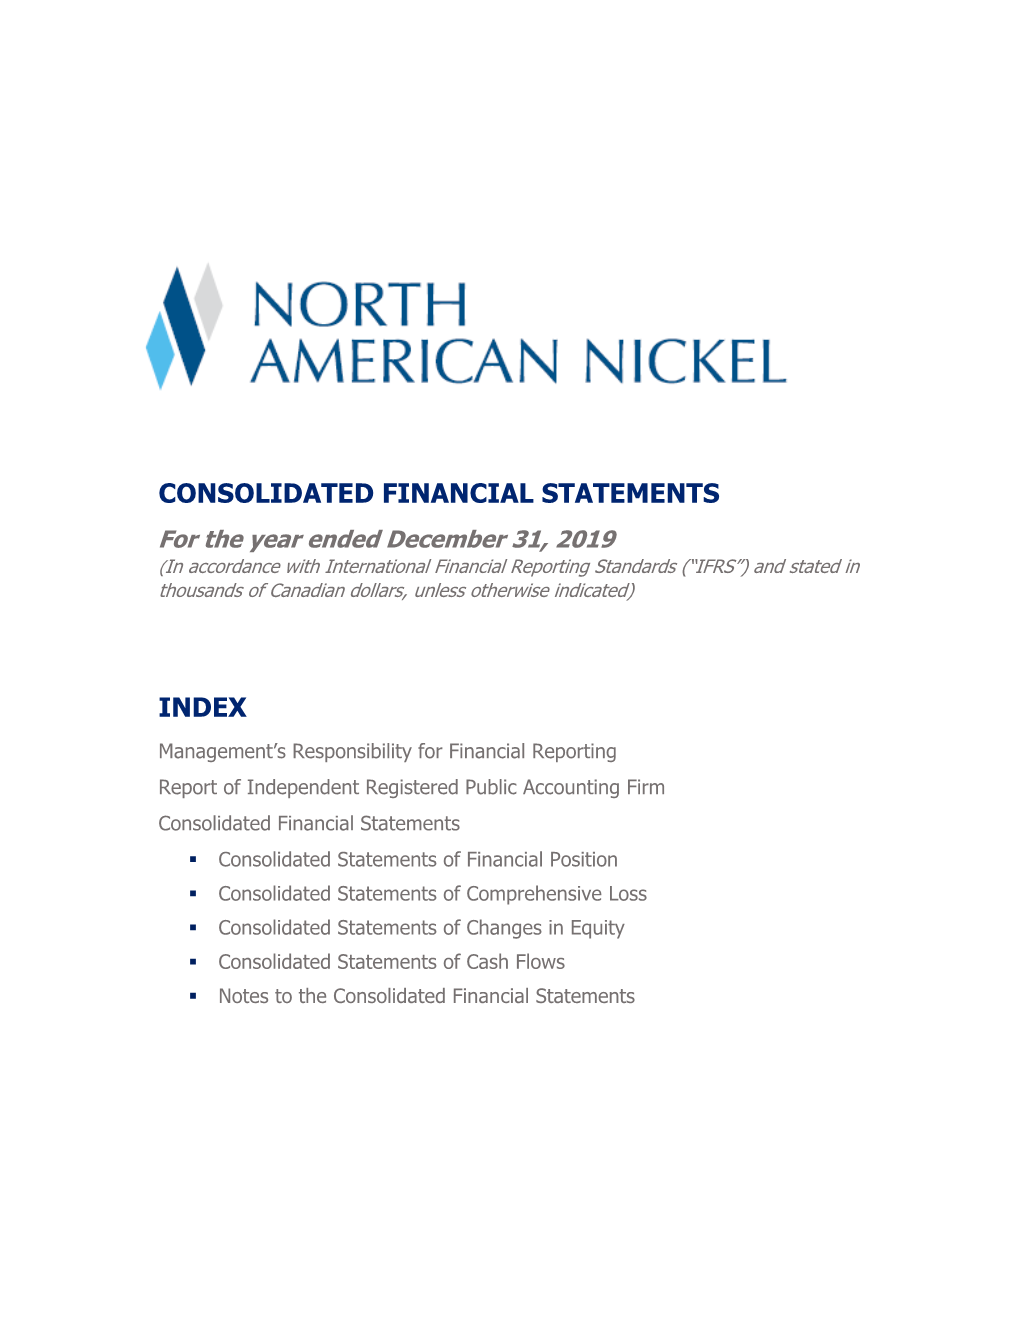 Annual Financial Reports